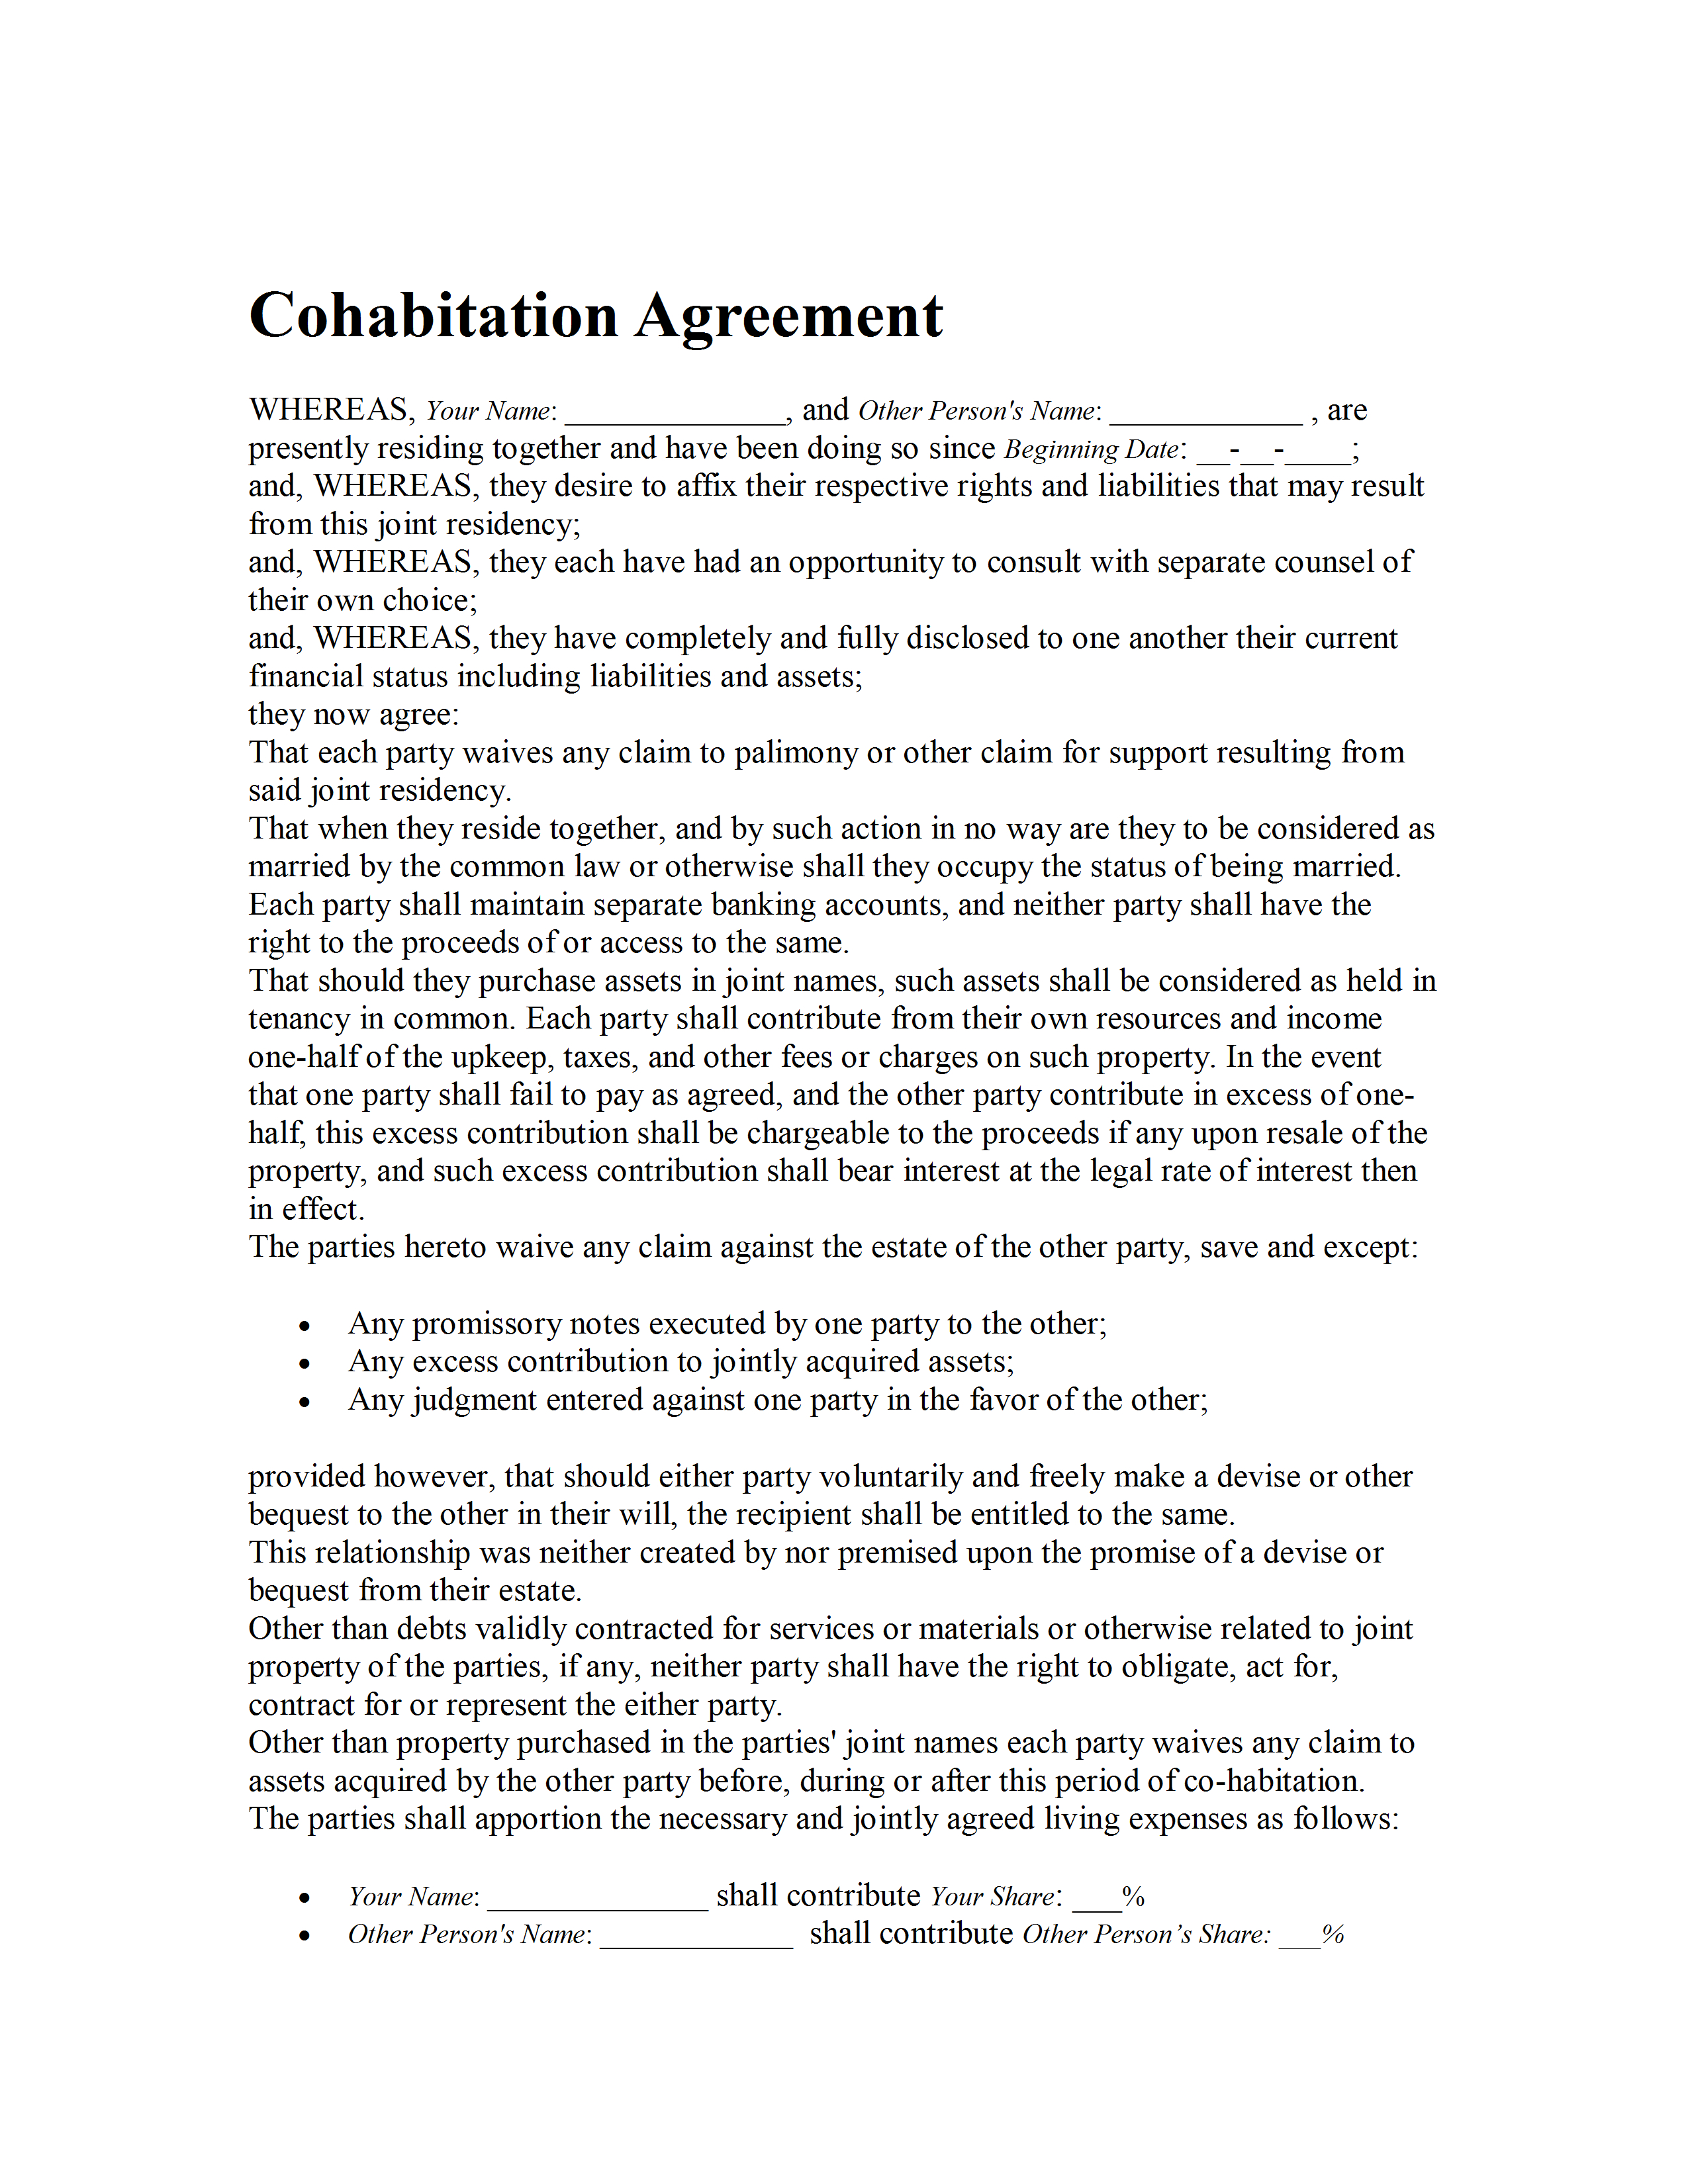 Cohabitation Agreement Template pertaining to Free Cohabitation Agreement Template